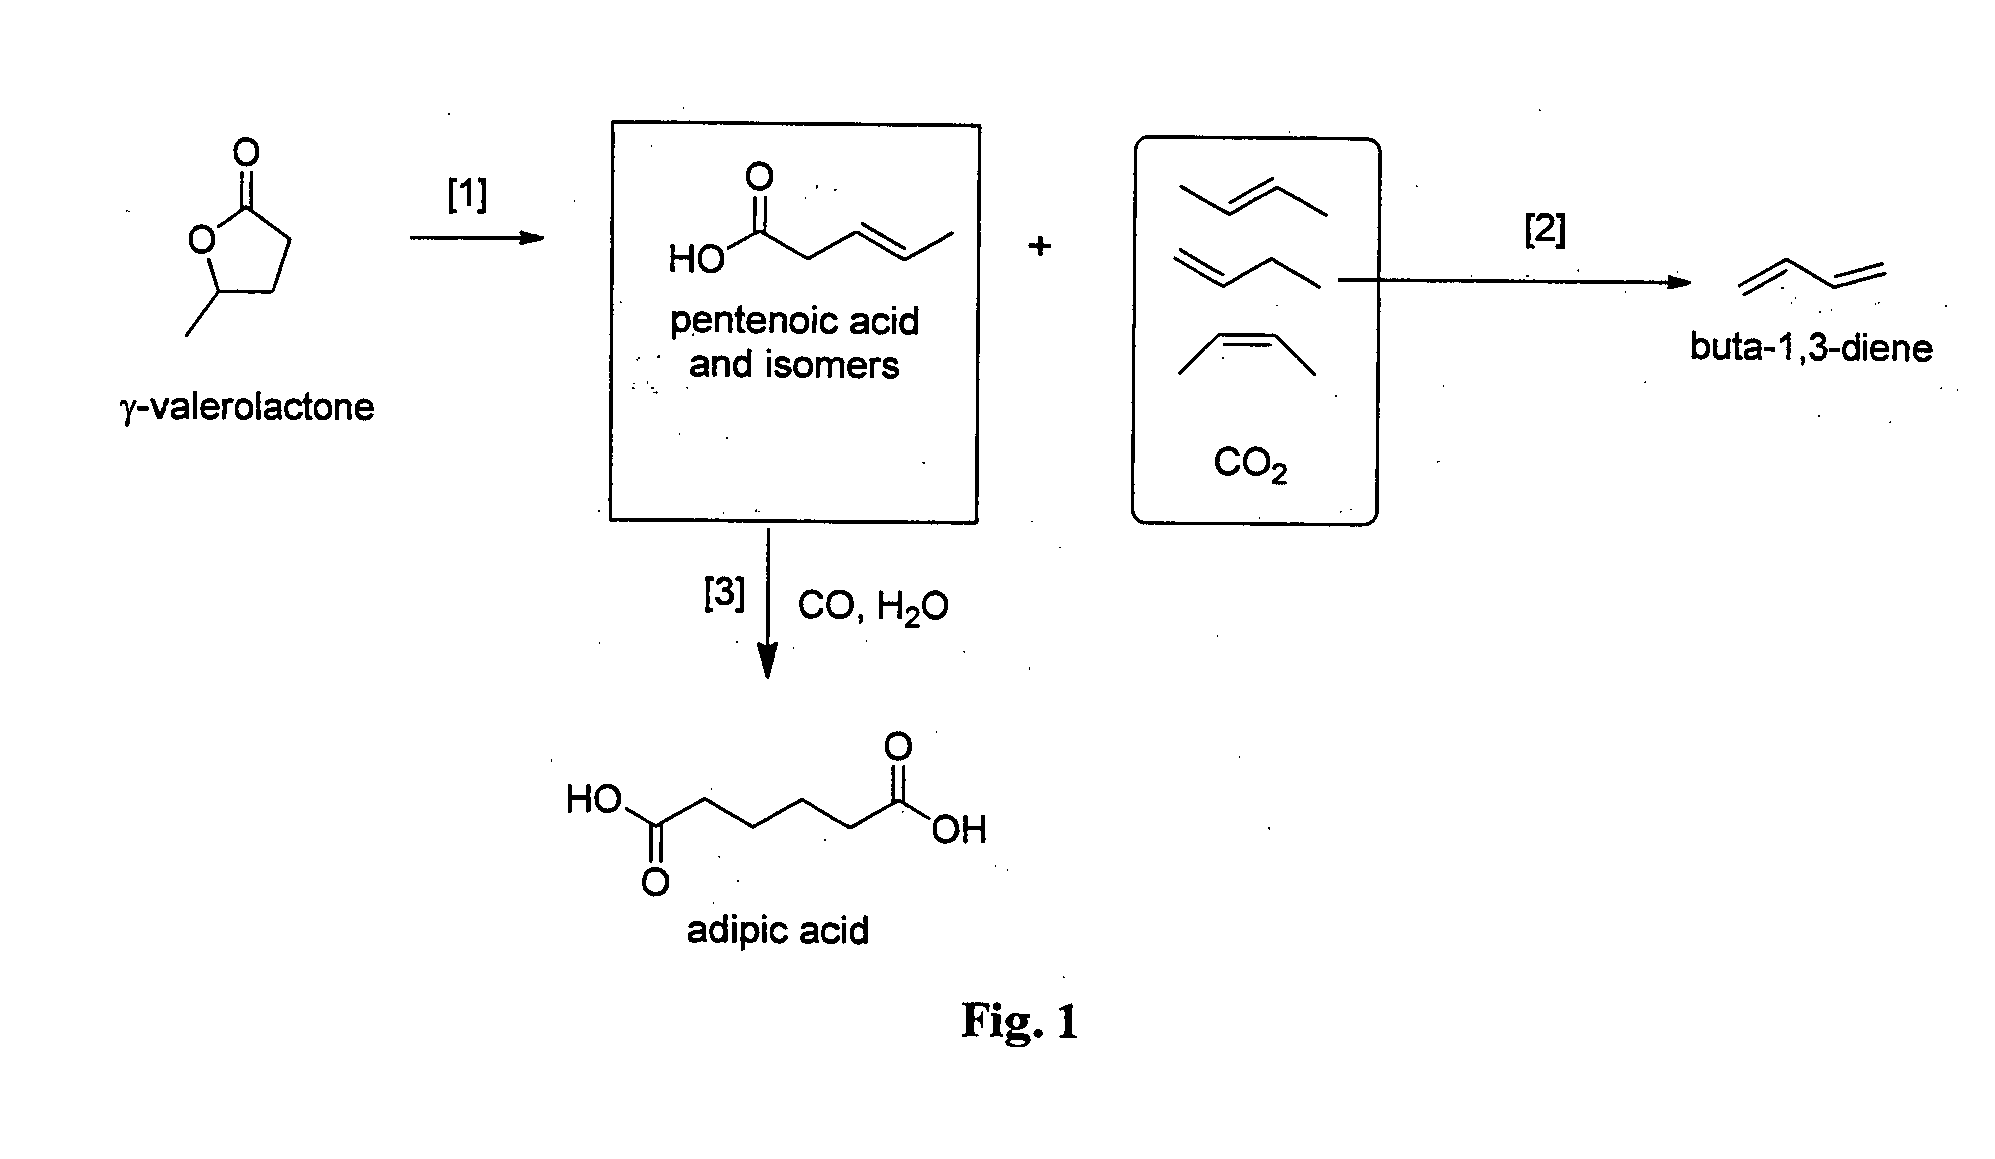 Process to produce a diene from a lactone